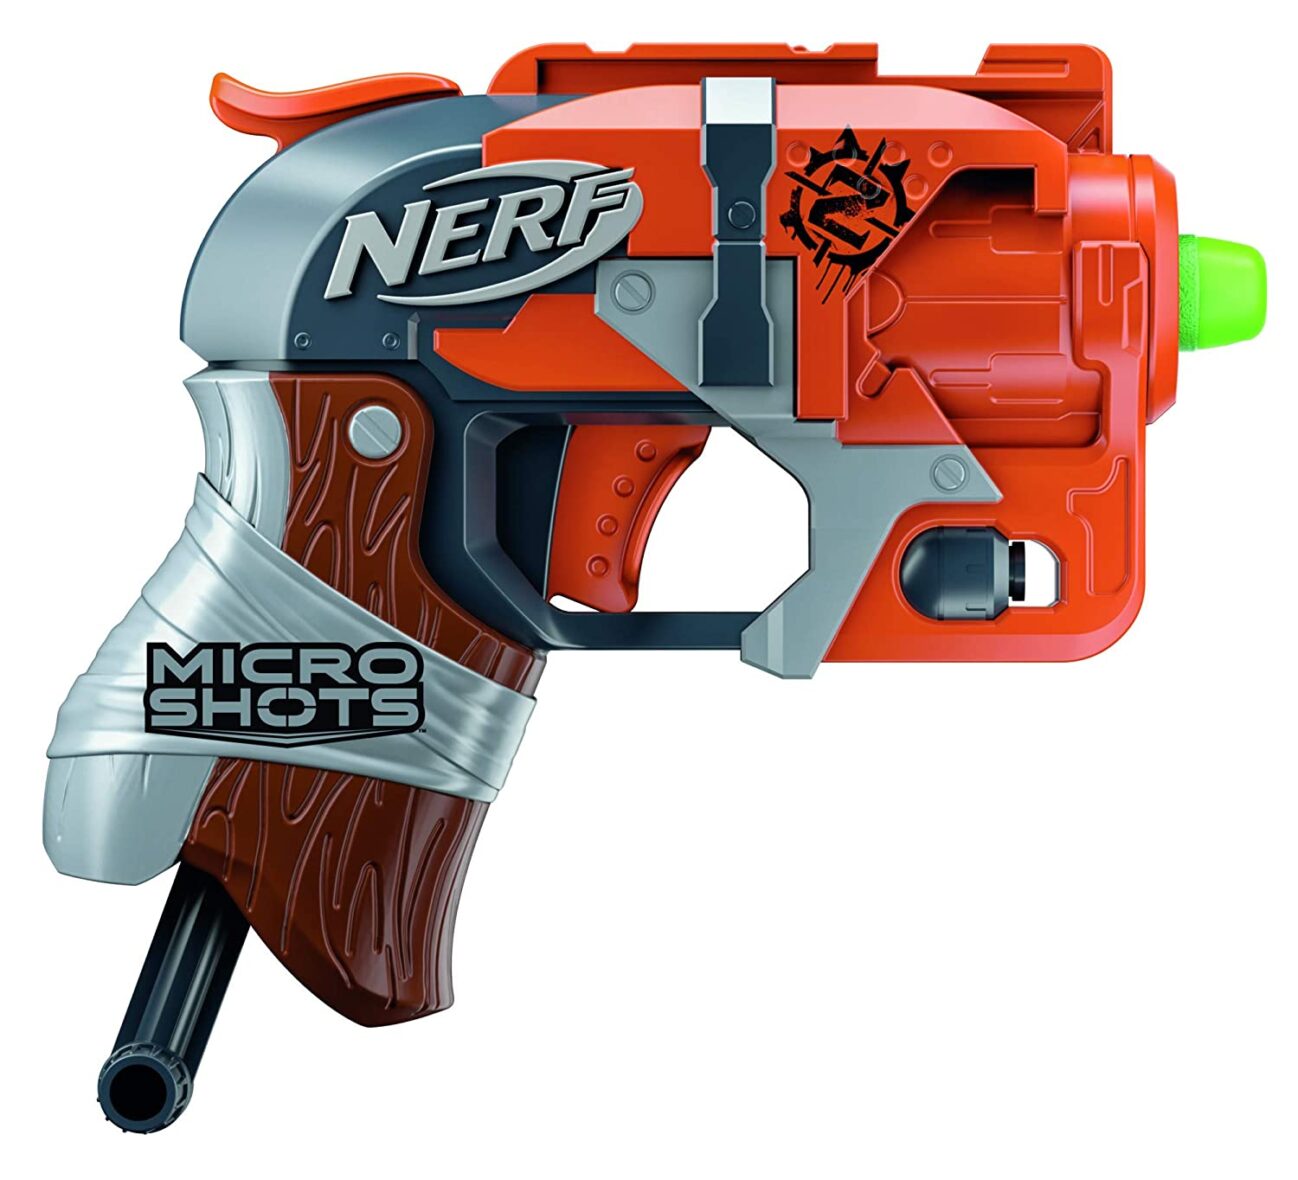 Nerf MicroShots Zombie Strike Hammershot, Includes blaster and 2 darts, For Kids Ages 8 years Old and Up